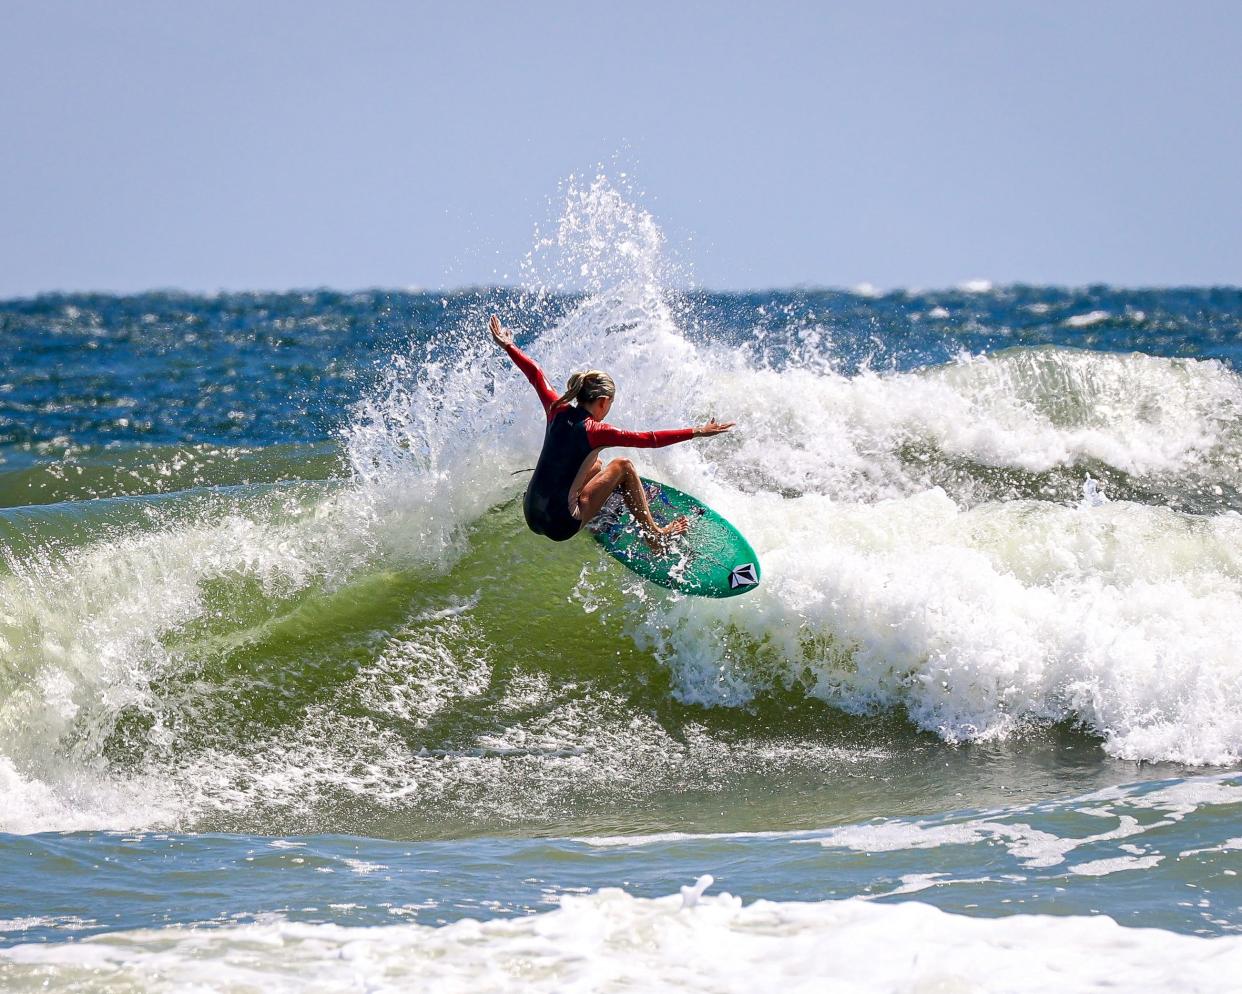 Lanea Mons hits the lip of a wave near the Jacksonville Beach Pier. The 13-year-old local surfing star was first profiled in an October 2020 story.